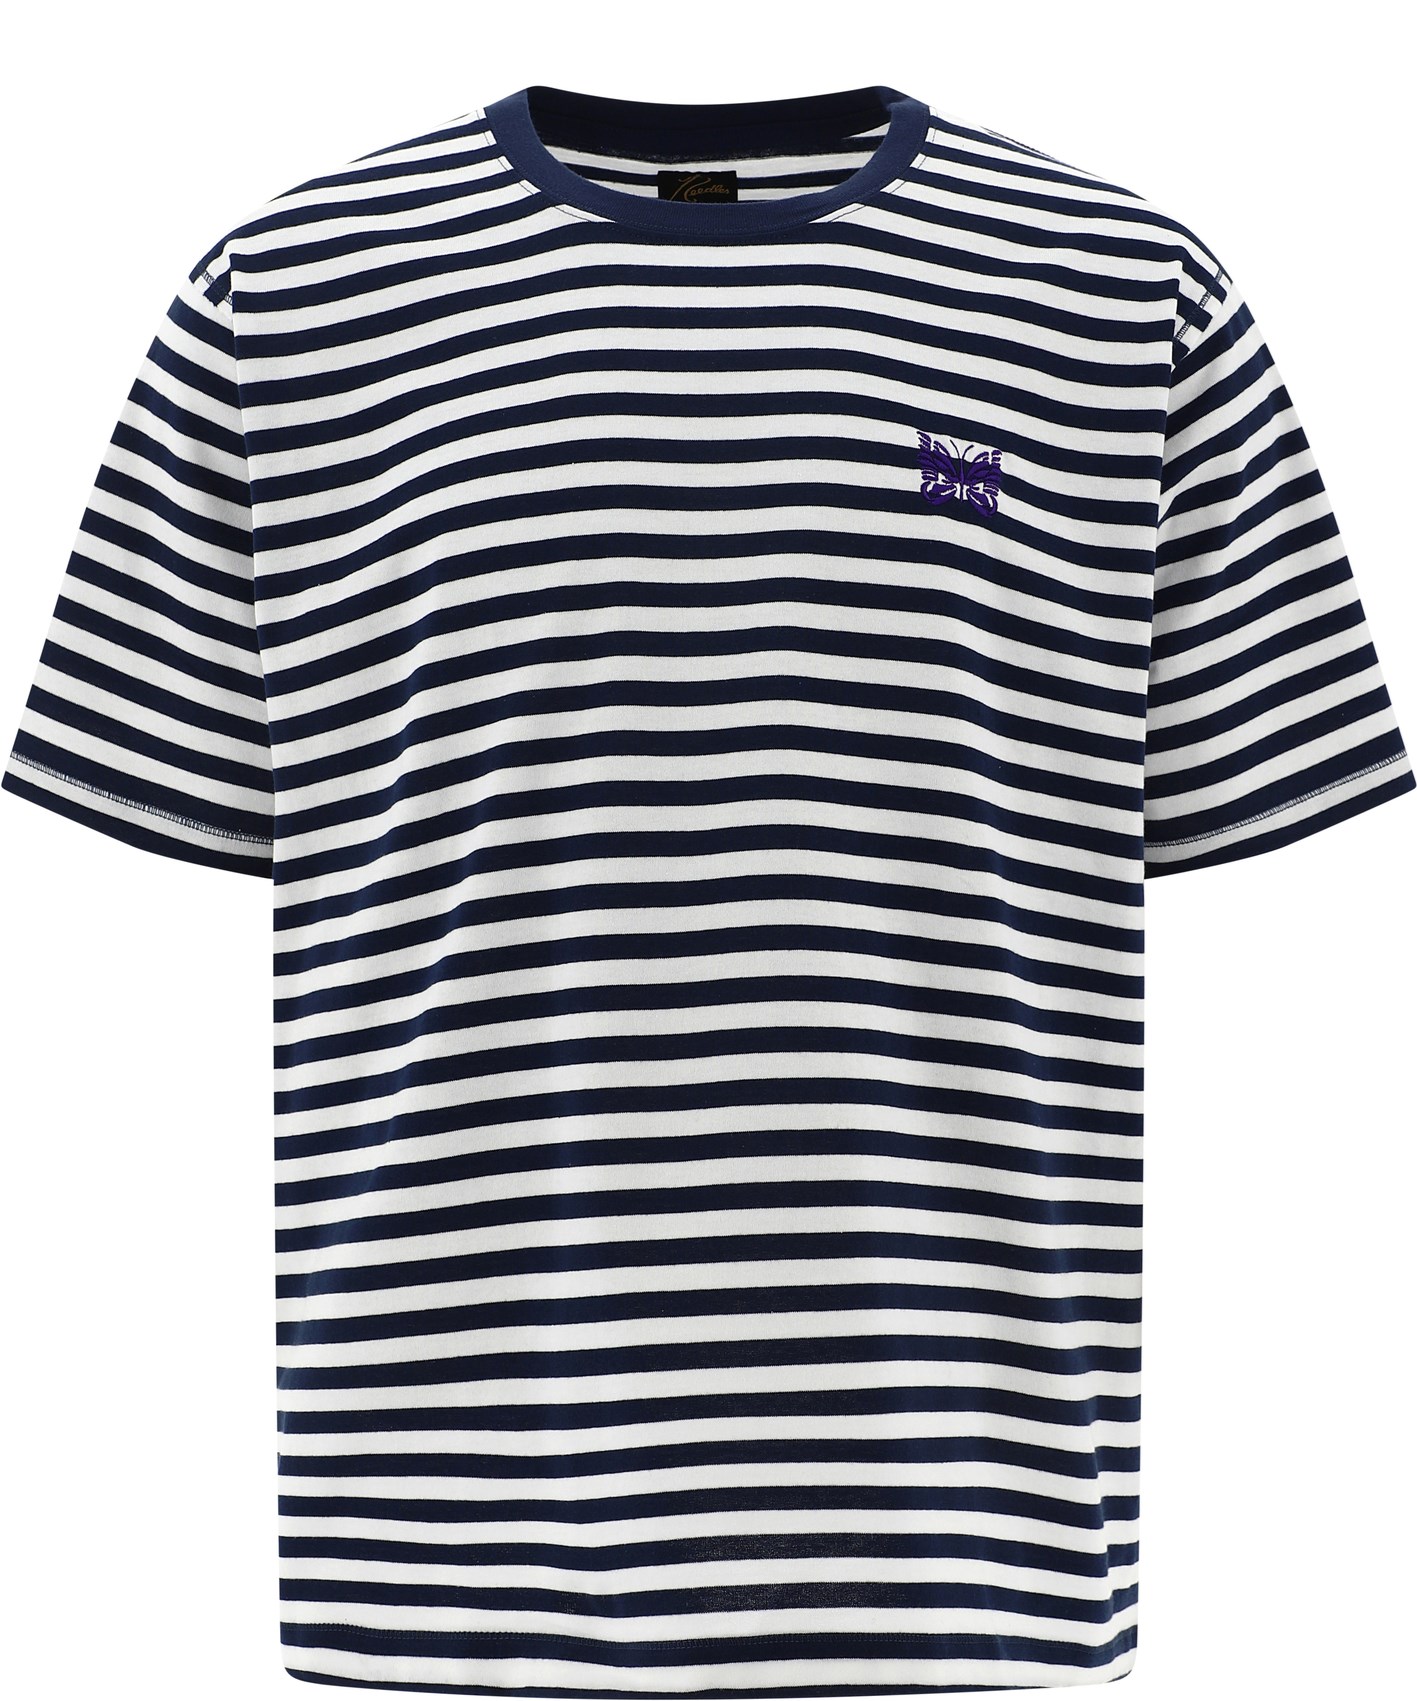 【Needles】Striped t-shirt with embroidery